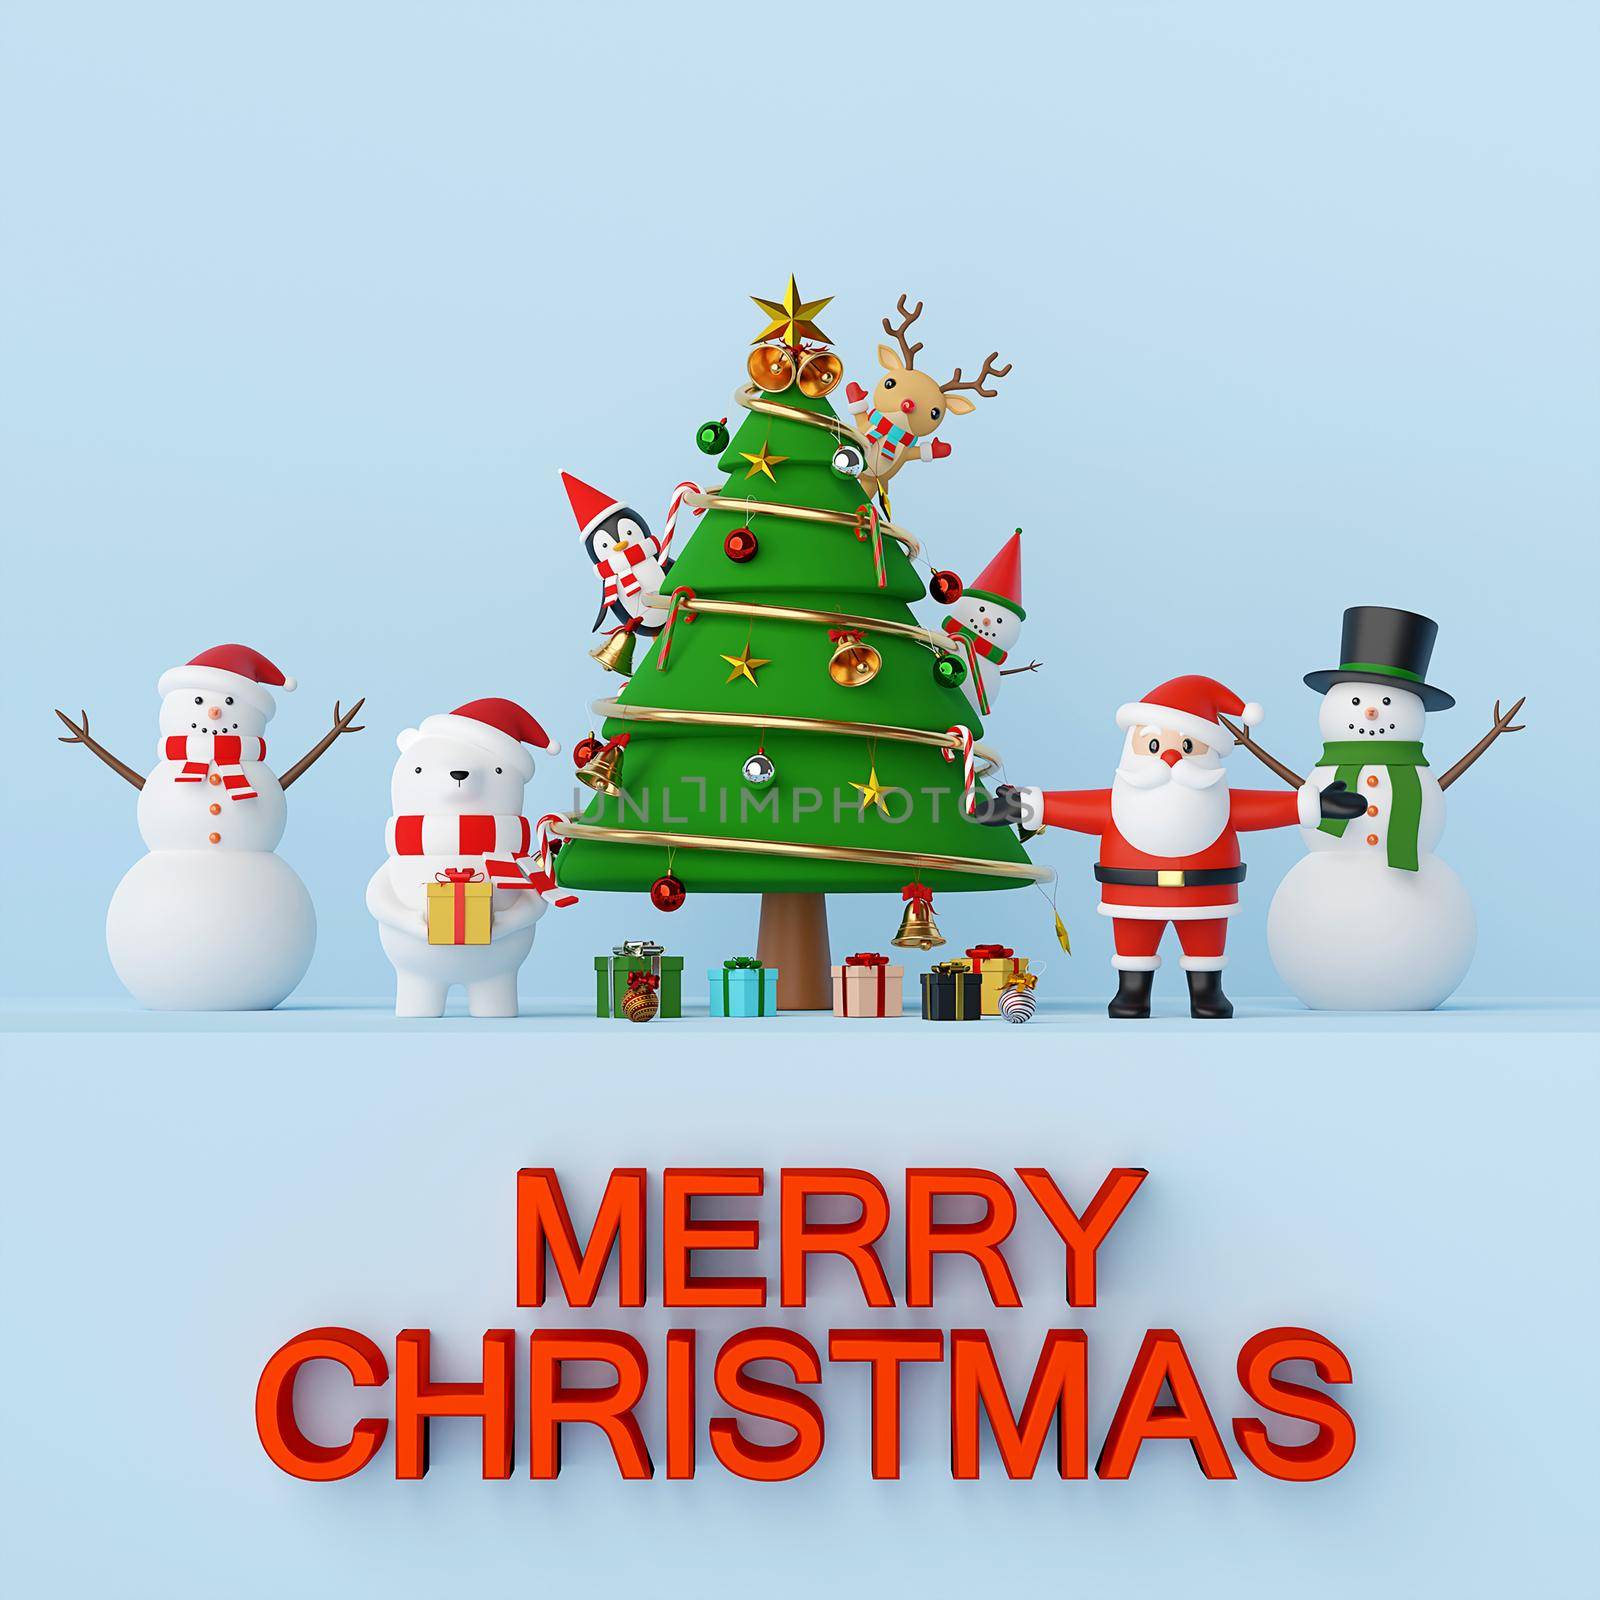 Merry Christmas and Happy New Year, Christmas party Santa Claus and friend with Christmas tree, 3d rendering by nutzchotwarut